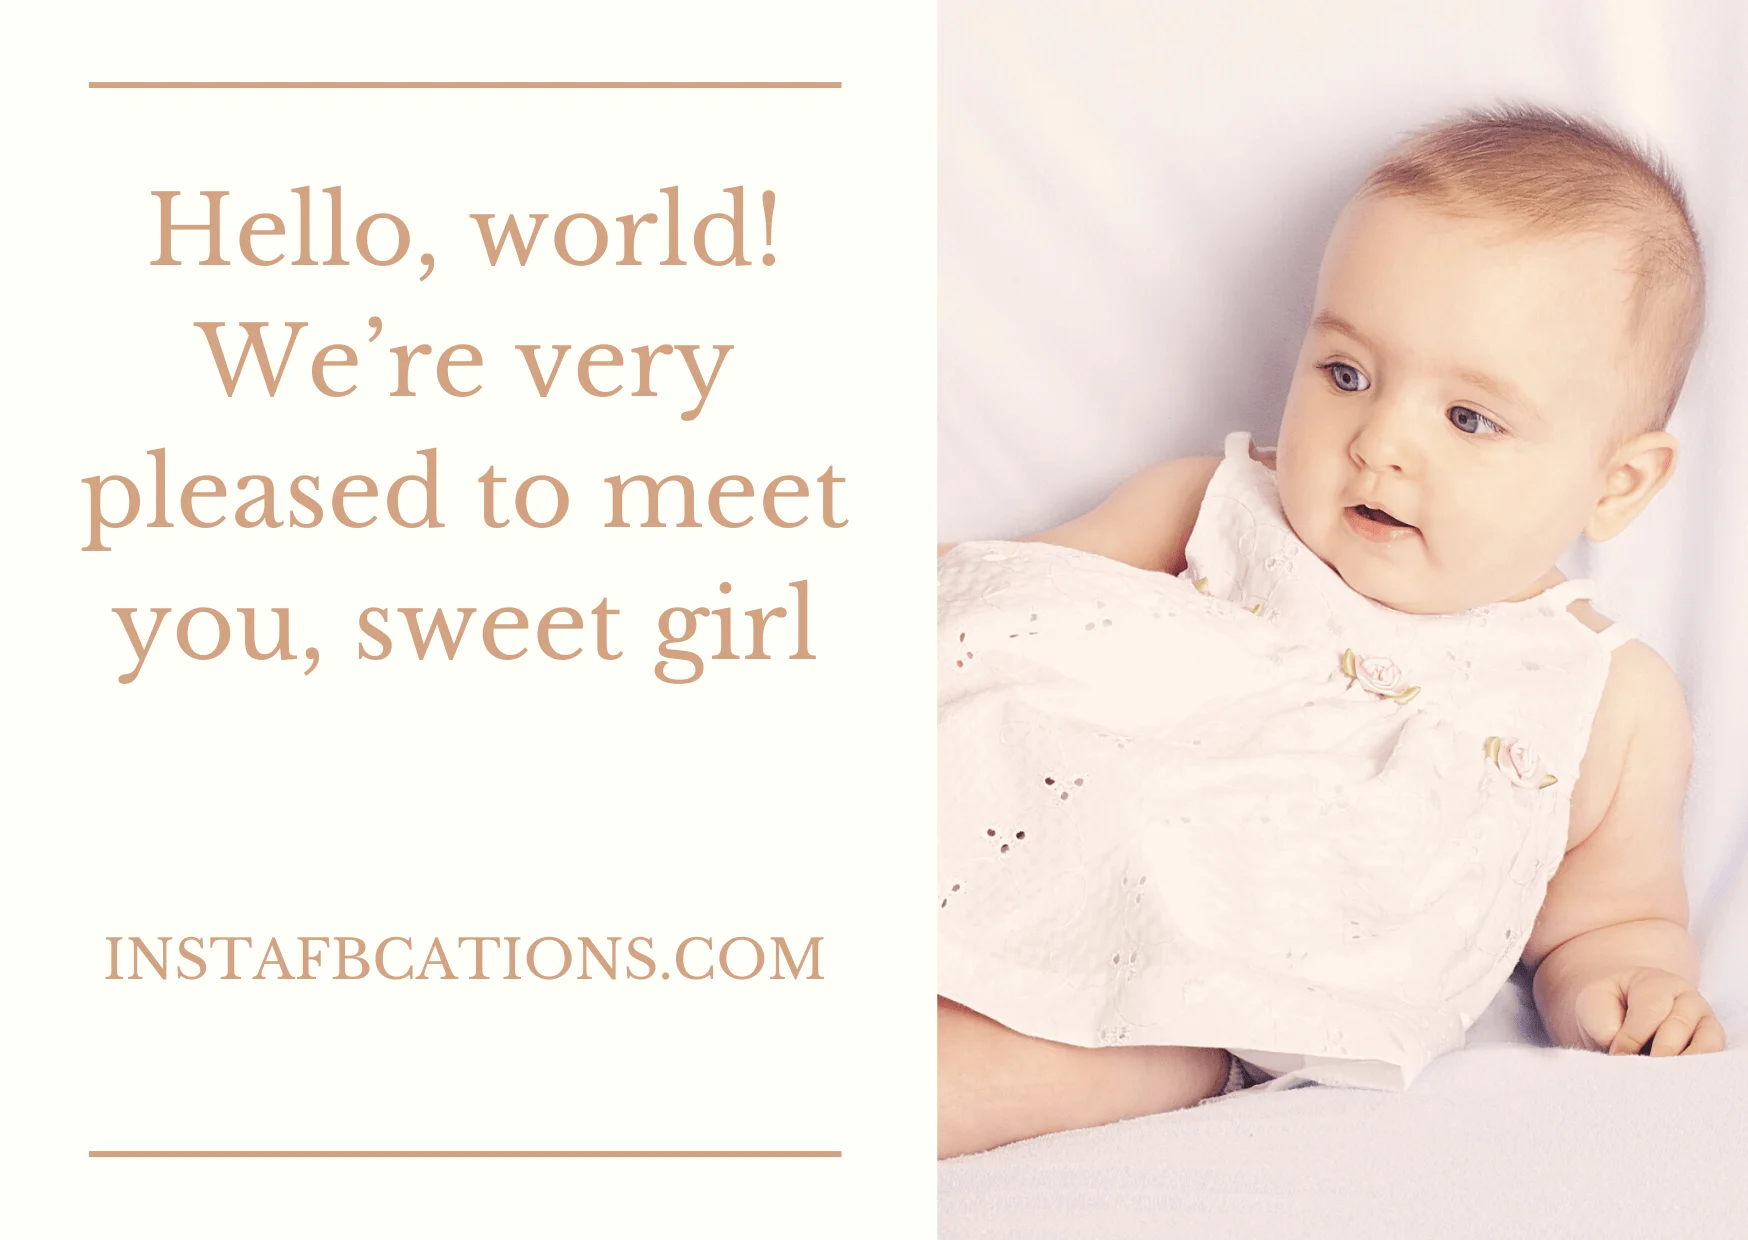 A cute girl and a quote written - "Hello, world! We’re very pleased to meet you, sweet girl"  - Trendy Captions for 6 Months old Baby Girl - 6 Month Old Baby Captions And Quotes For Instagram